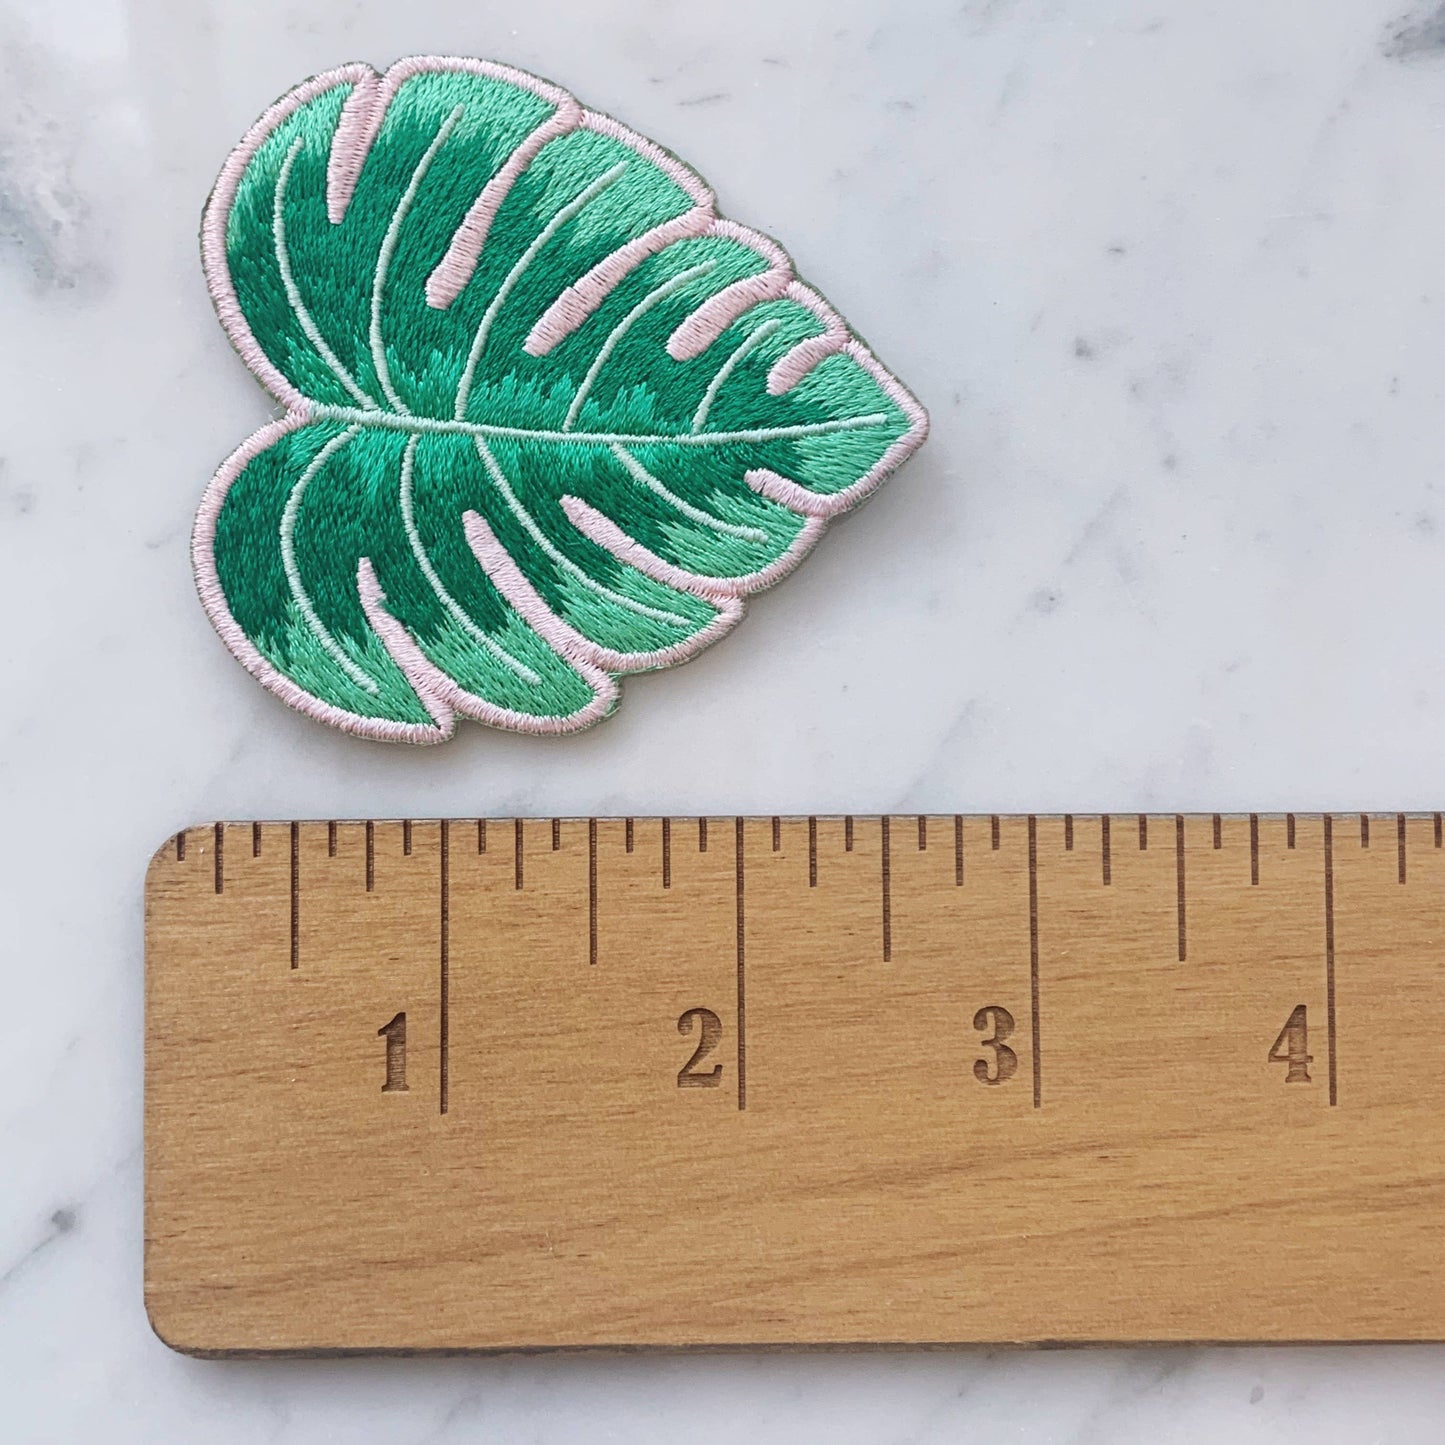 Wildflower + Co. - Waves Collection - Monstera Leaf Patch